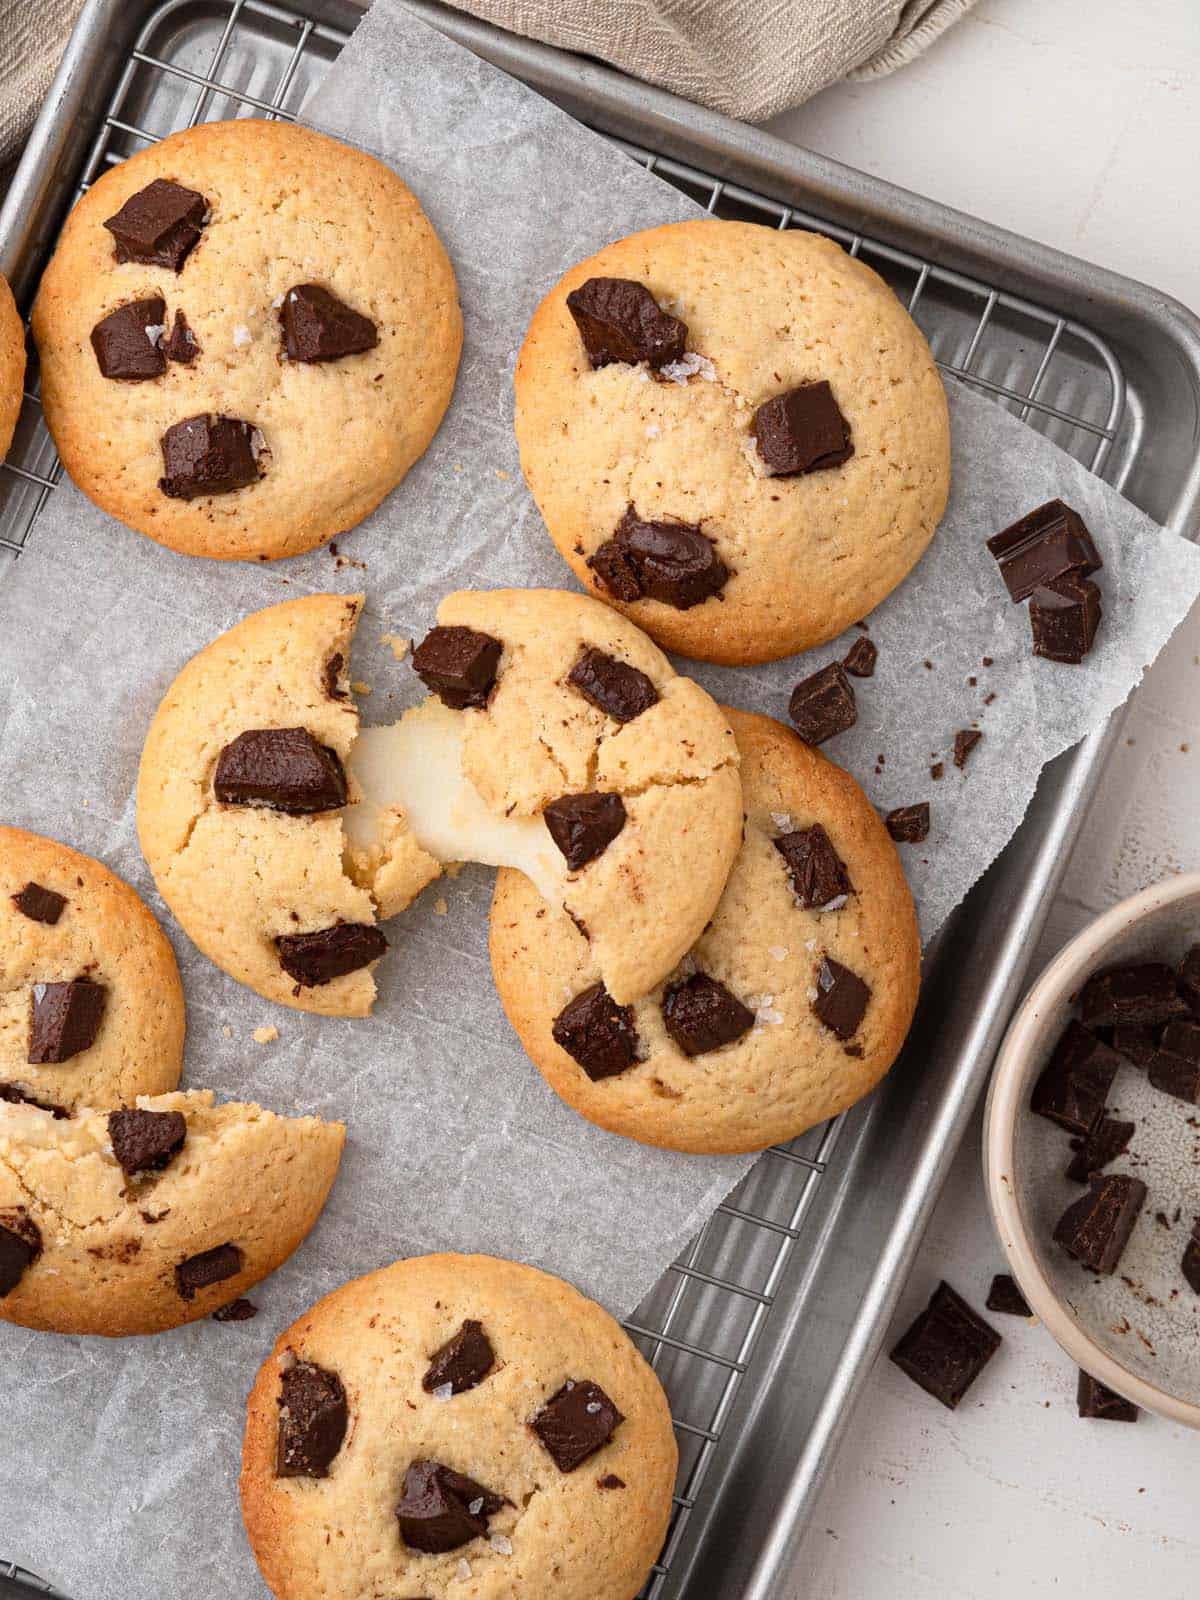 Chocolate chunk cookies filled with stretchy, chewy mochi